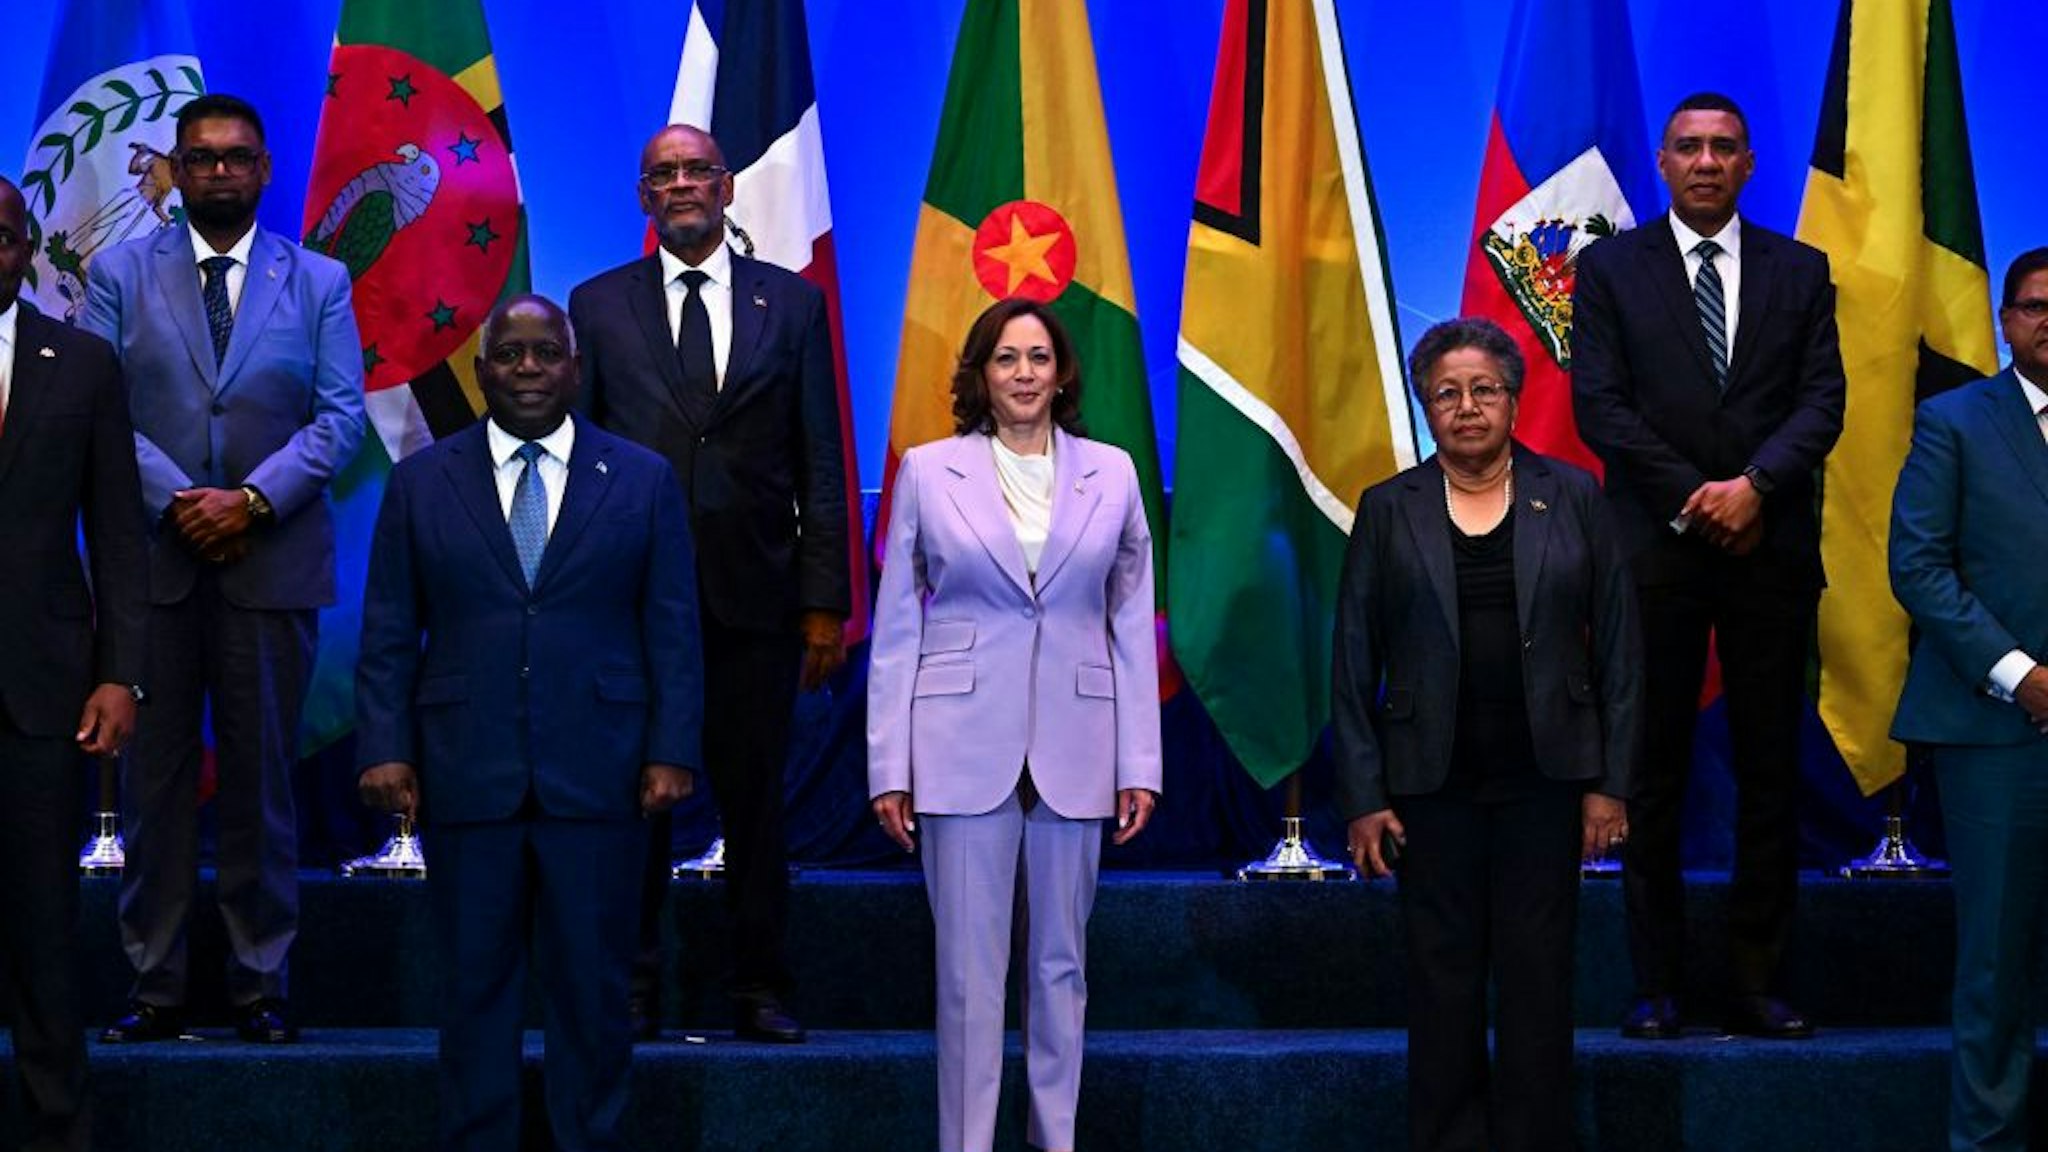 Prime Minister of The Bahamas Philip Davis (2nd L), US Vice President Kamala Harris (C), Secretary-General of the Caribbean Community (CARICOM) Carla N. Barnett (2nd R) pose for a family photo during the US-Caribbean Leaders Meeting in Nassau on June 8, 2023. (Photo by CHANDAN KHANNA / AFP)